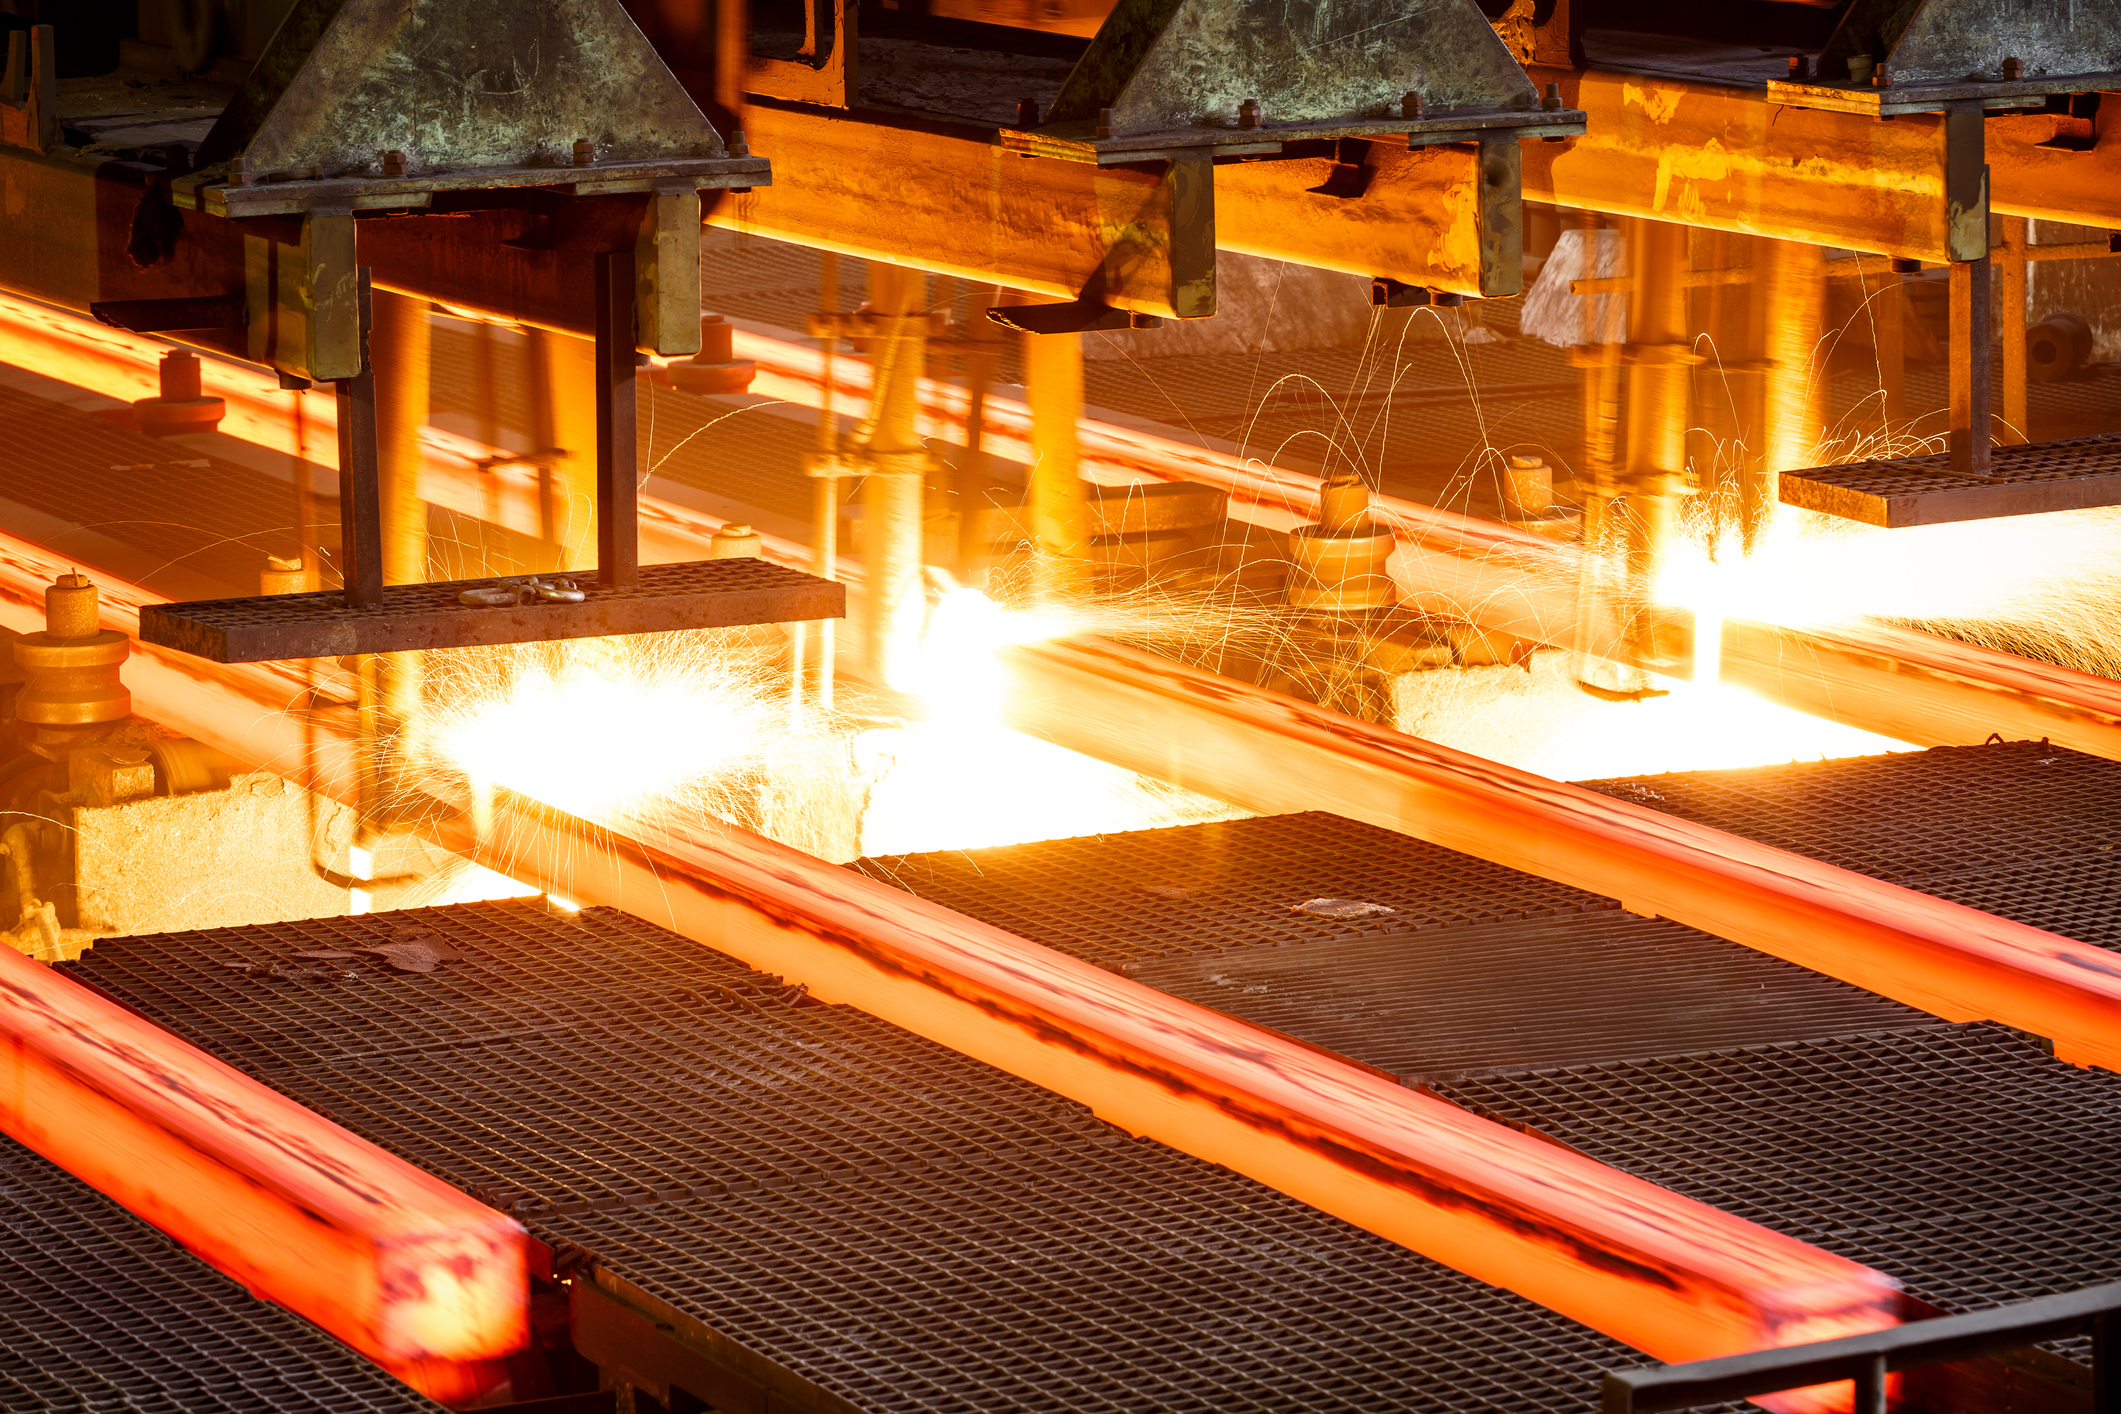 Why Hydraulics and Steel Go Together: Heat, Power, Precision